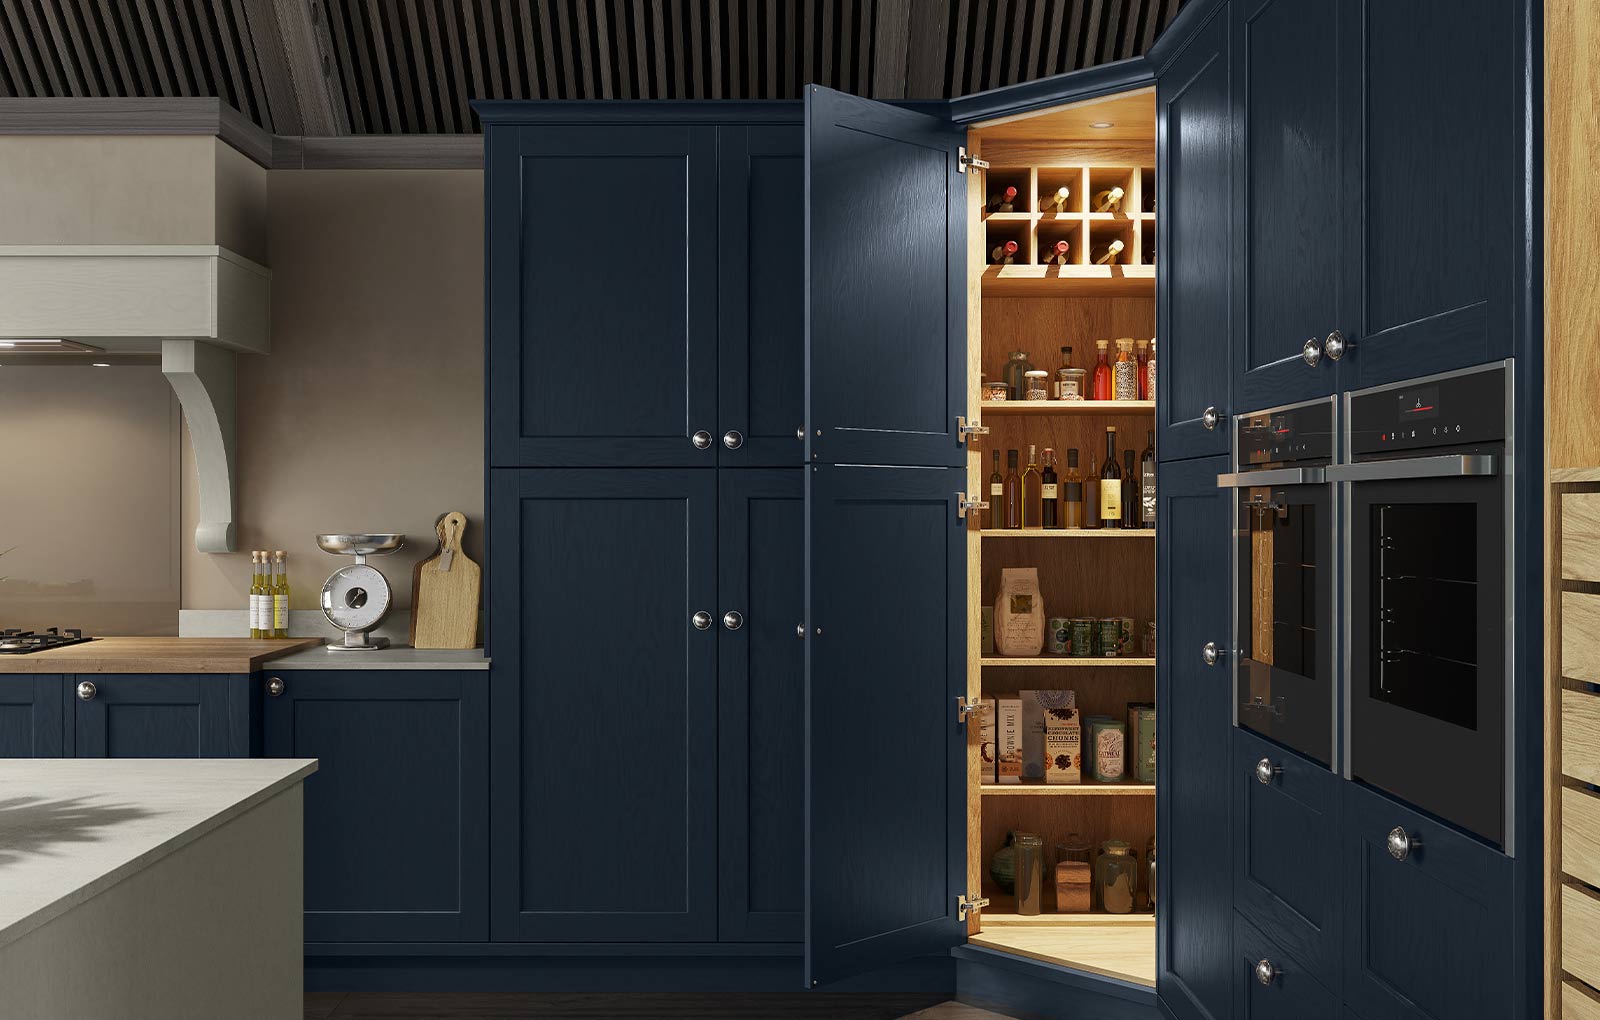 Corner kitchen pantry in a blue classic kitchen